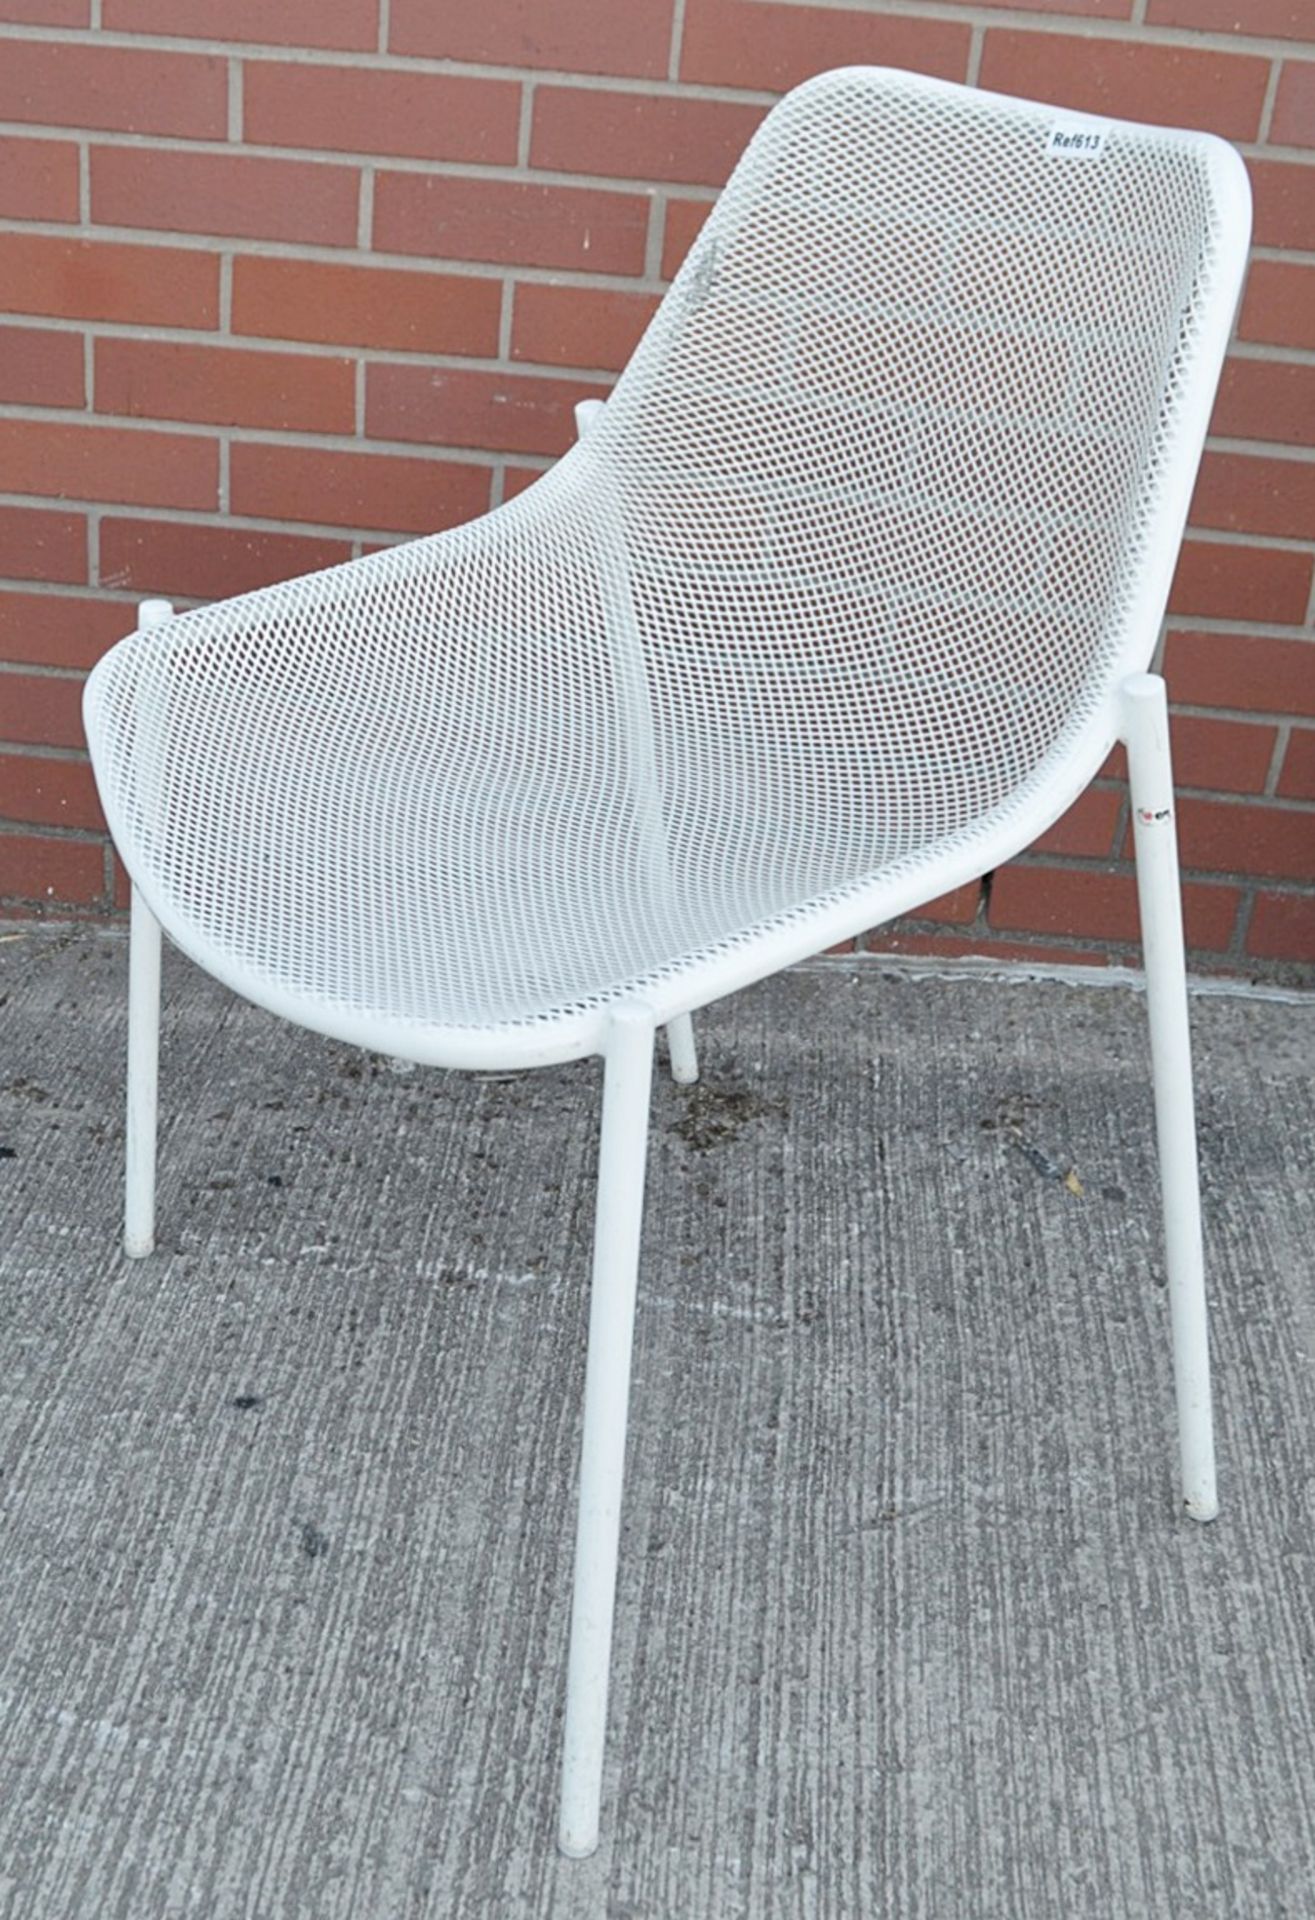 19 x Assorted Pieces Of Outdoor Cafe Furniture Including Tables Chairs And Stools - Altrincham WA14 - Image 3 of 5